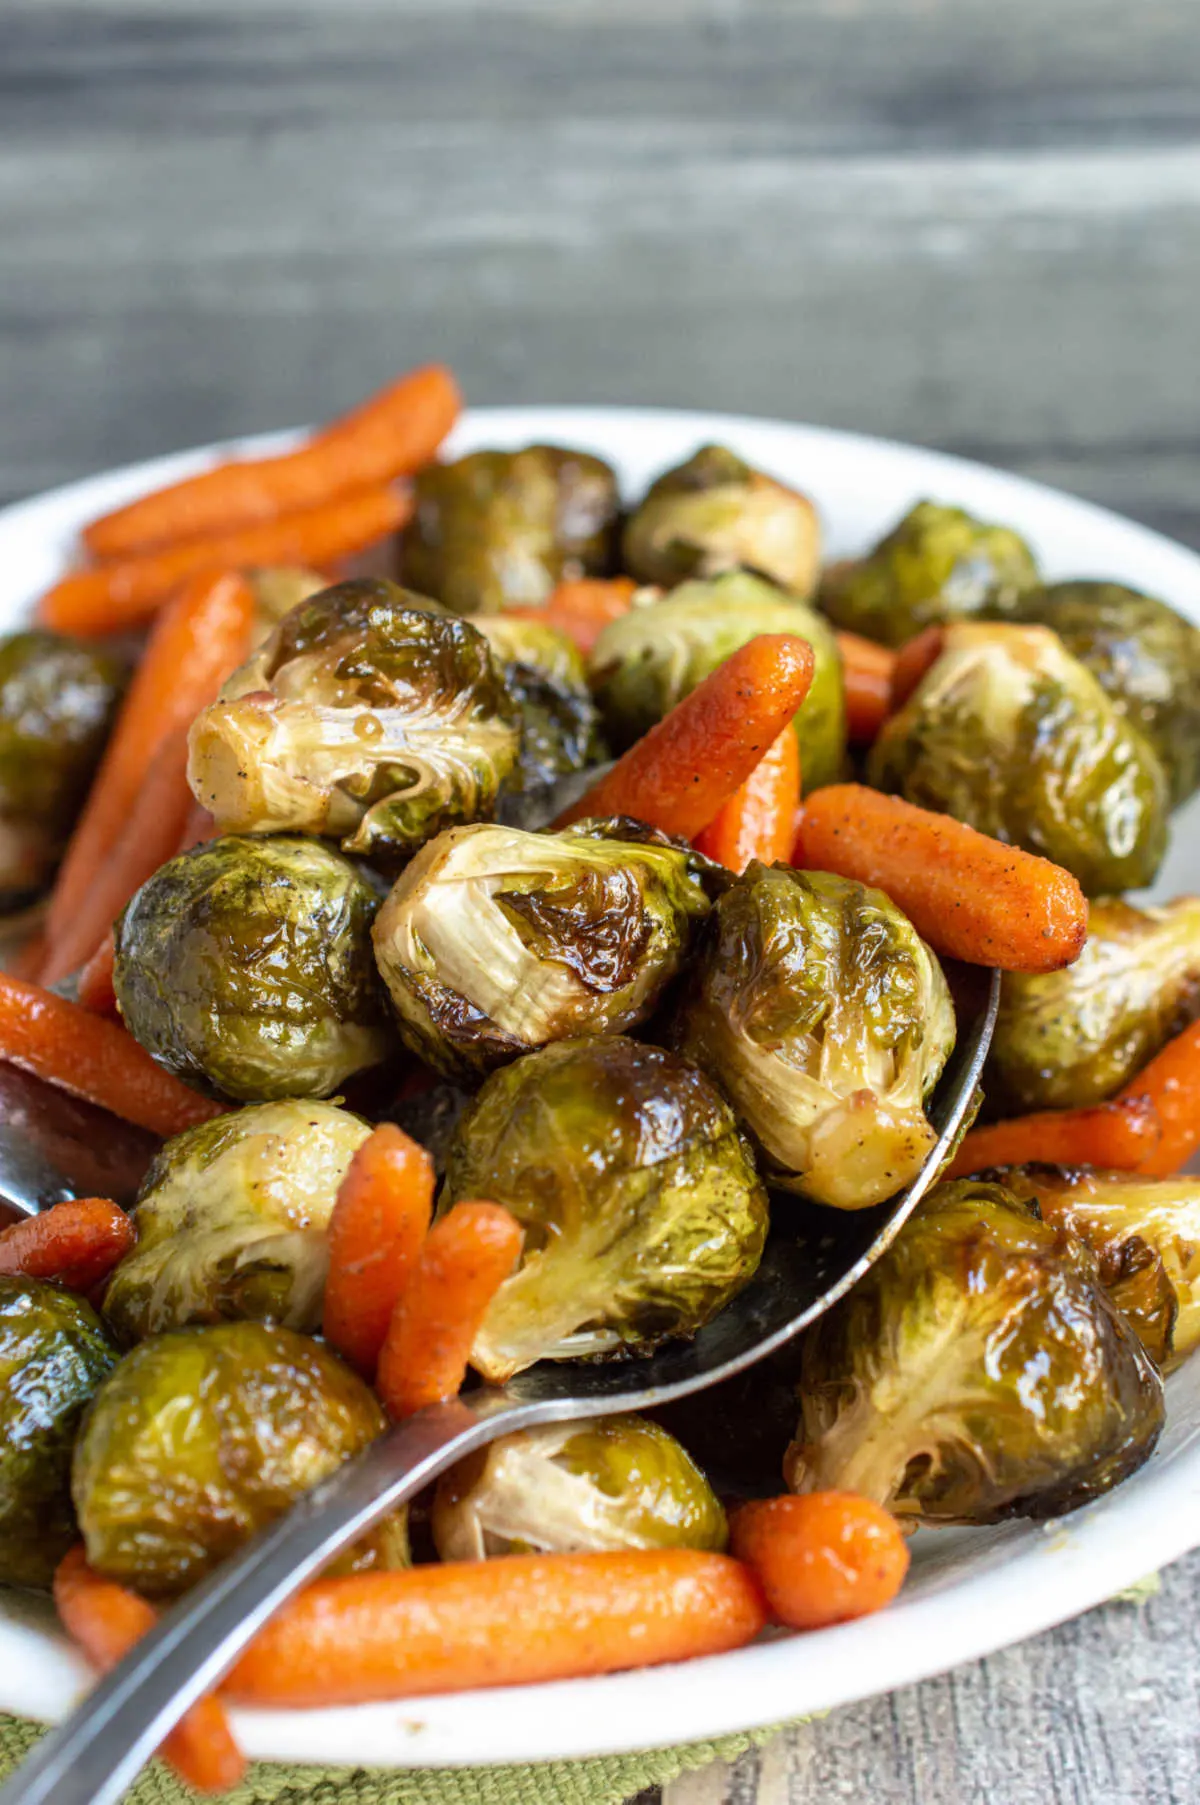 Serving dish filled with roasted brussels sprouts and baby carrots. 